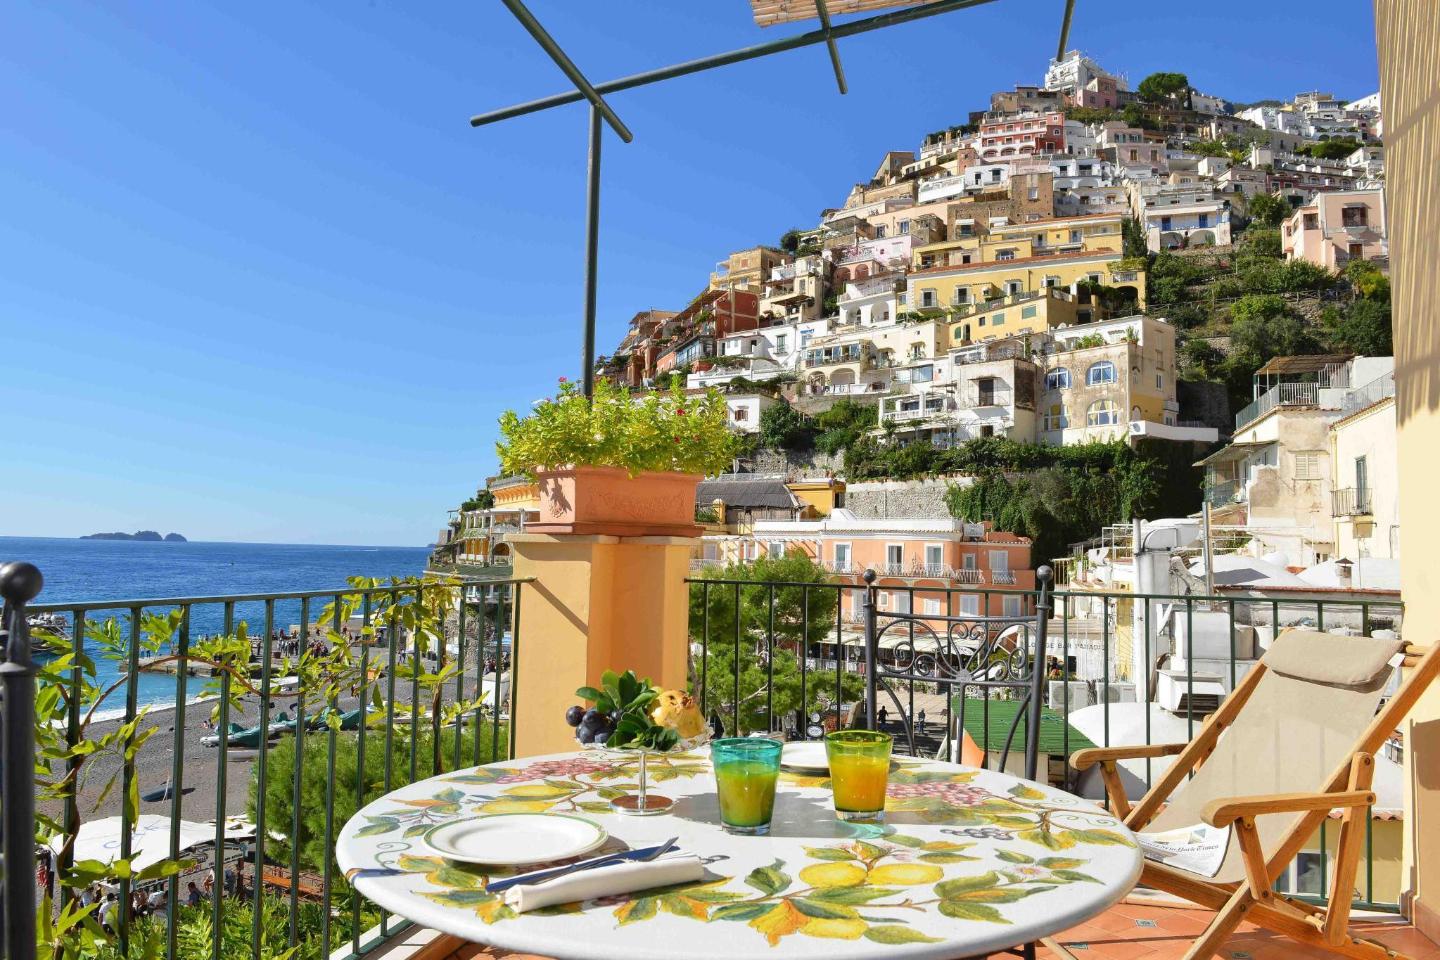 sorg Tale Mistillid The 10 best luxury hotels in Positano, Italy | Booking.com